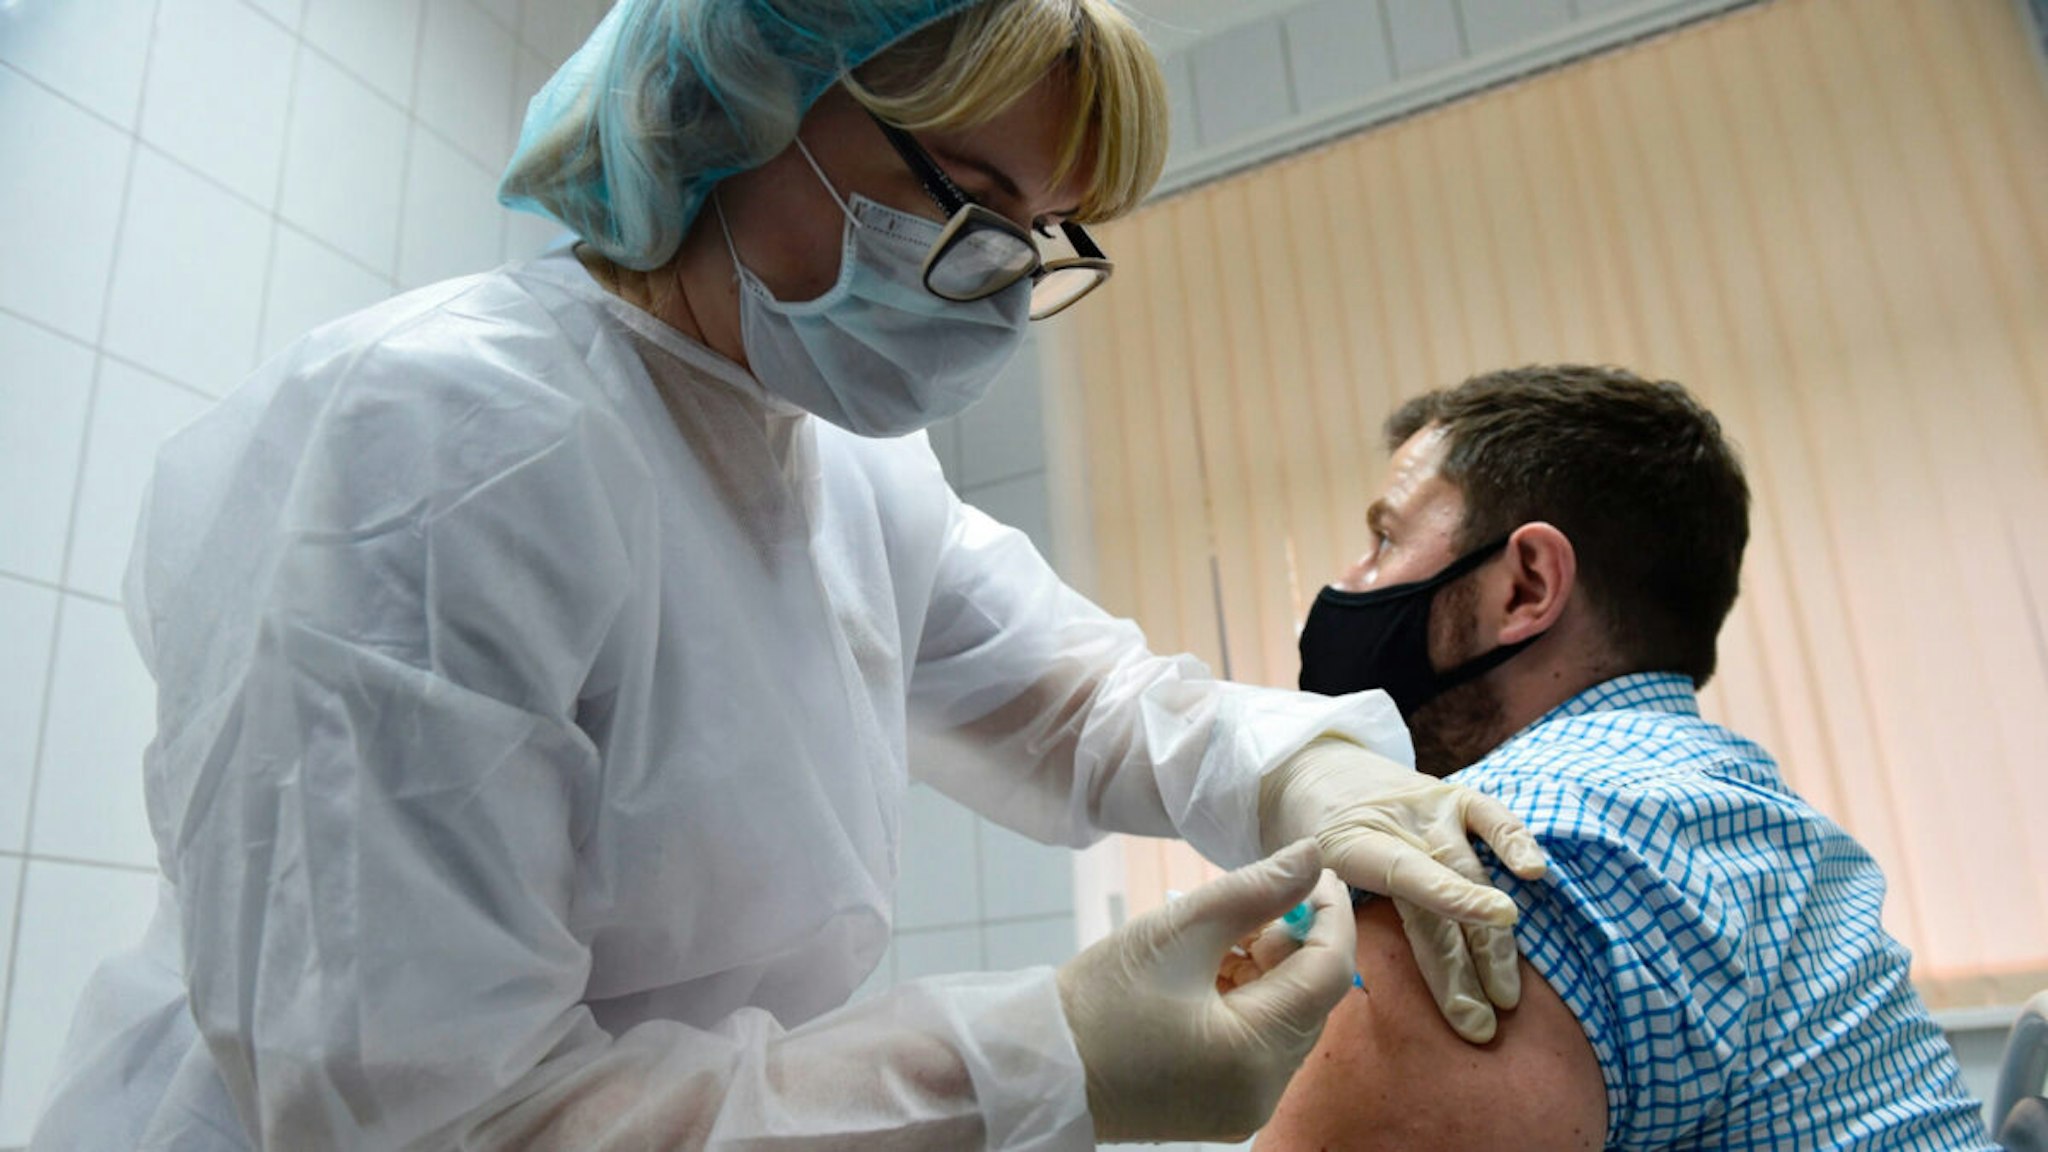 A nurse inoculates volunteer Ilya Dubrovin, 36, with Russia's new coronavirus vaccine in a post-registration trials at a clinic in Moscow on September 10, 2020.